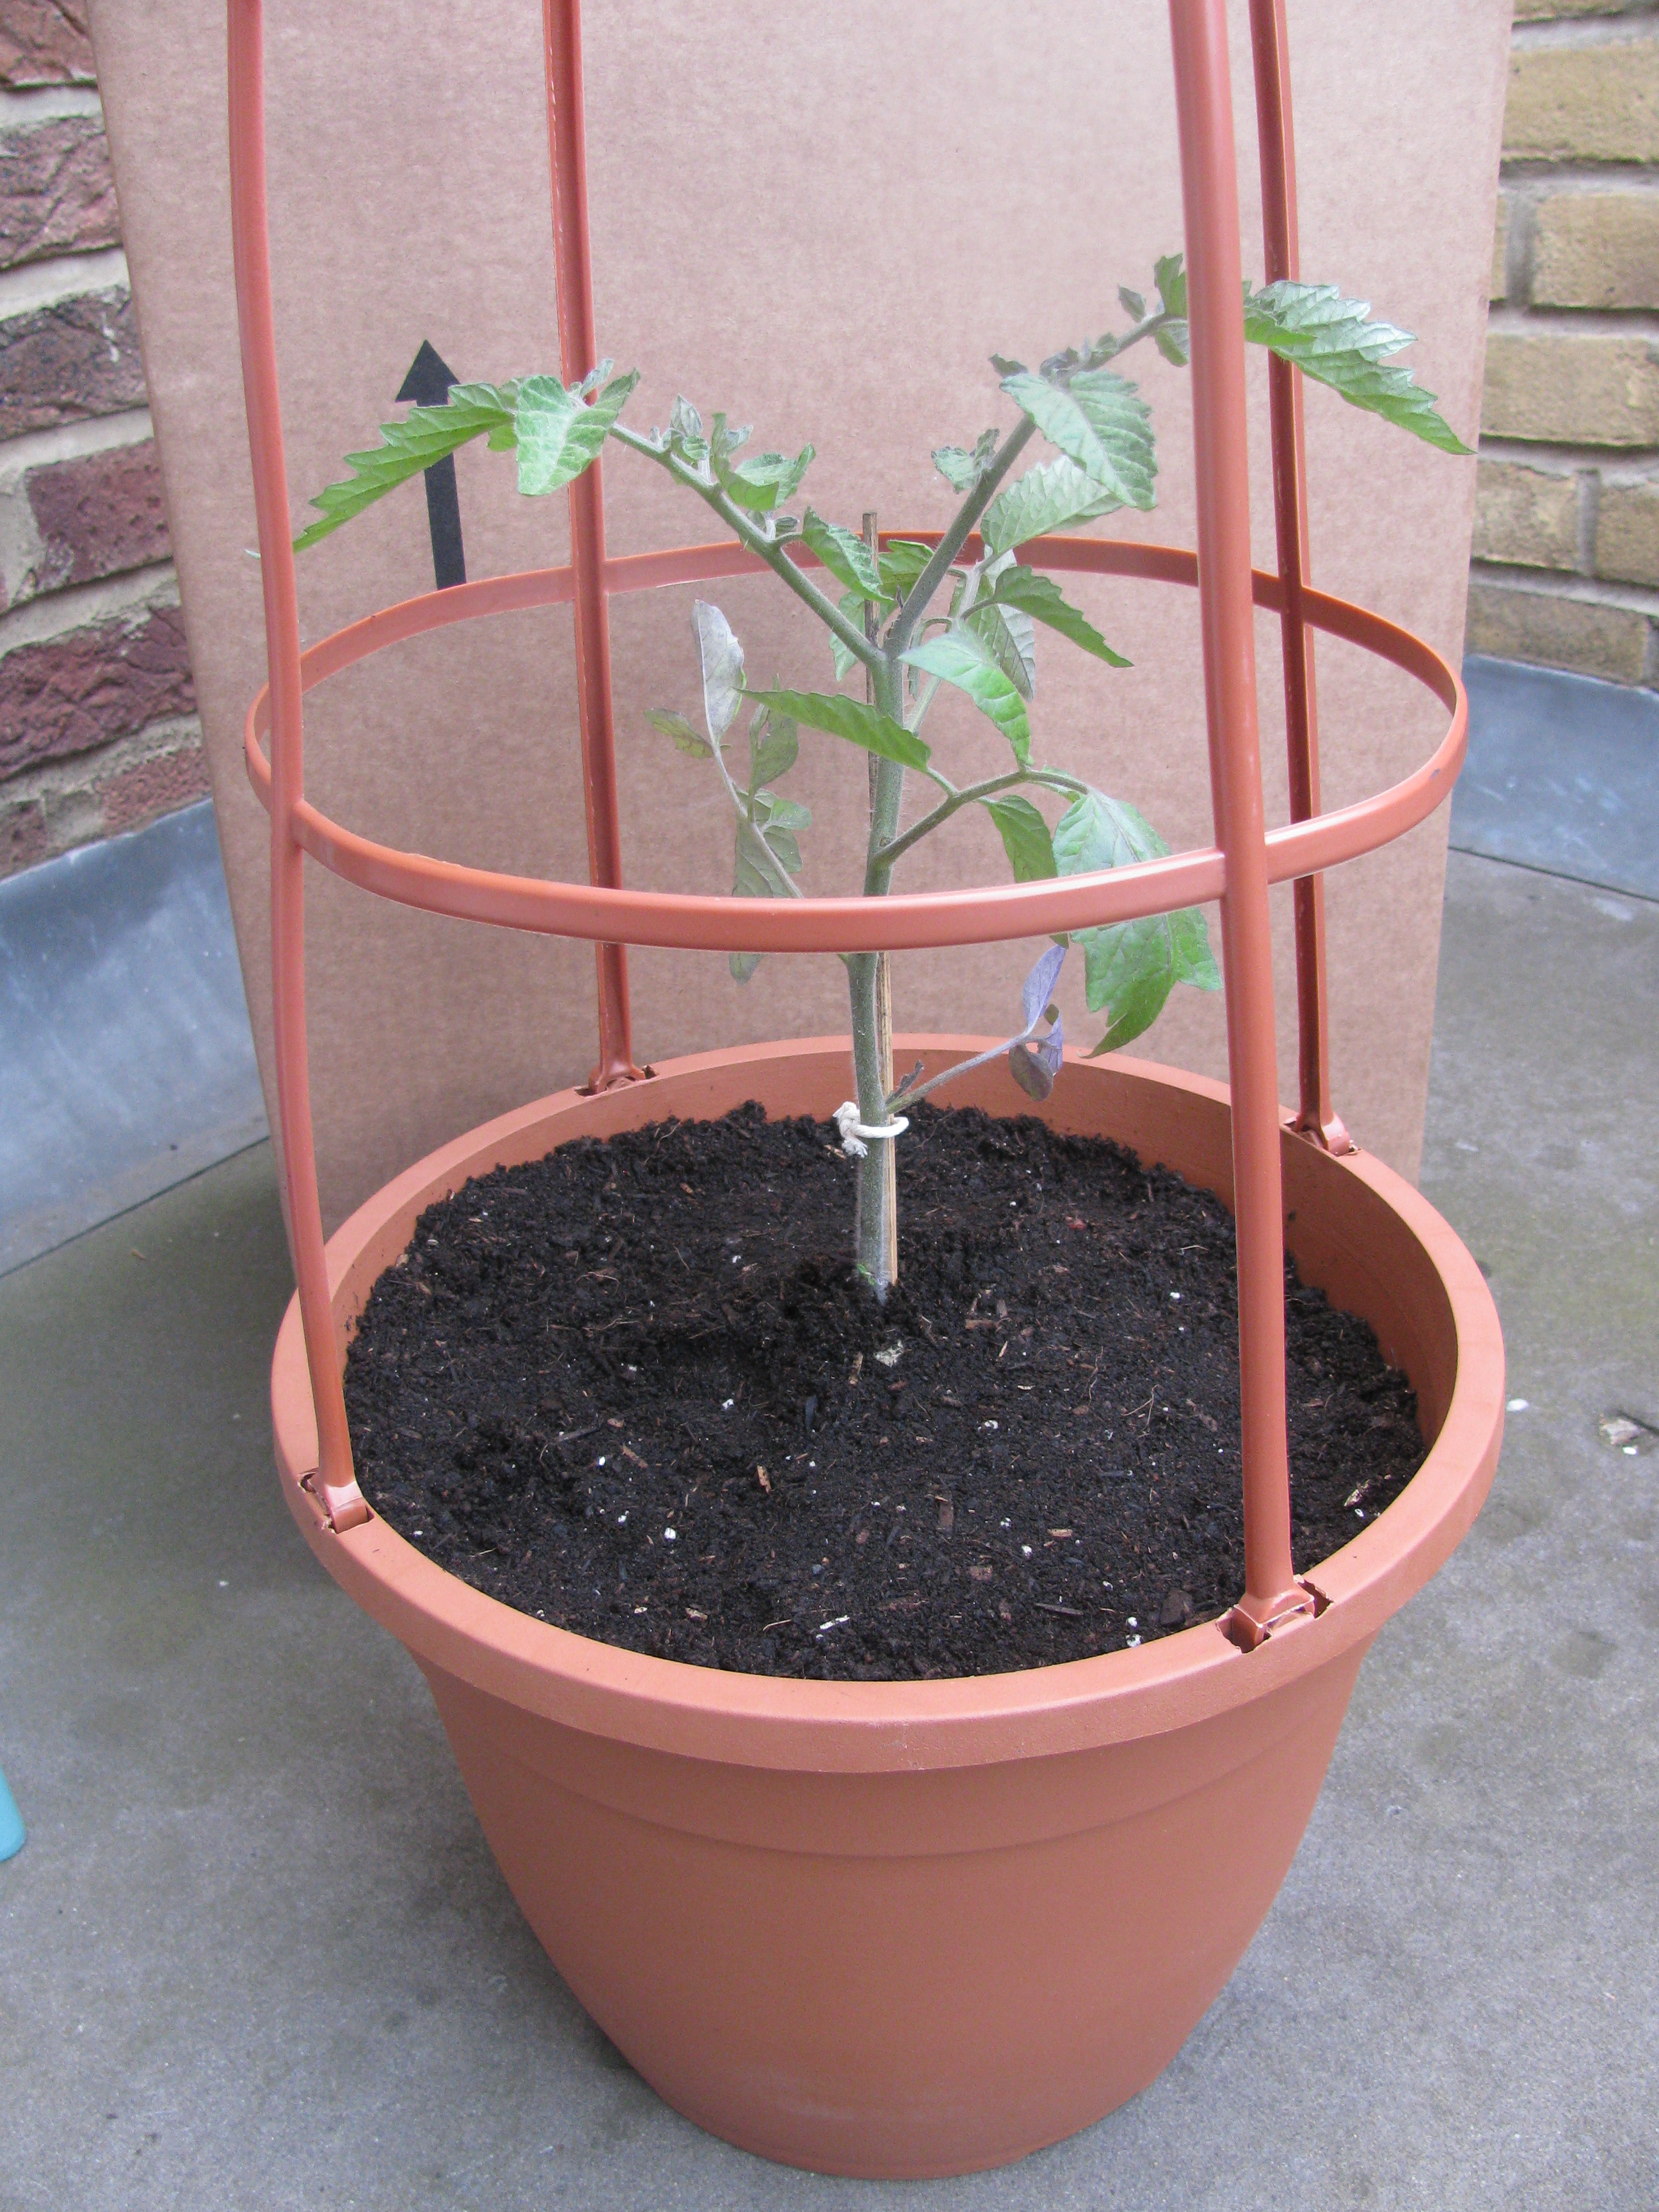 Tips and Tricks for Growing Tomatoes in Containers| Garden Ideas: Growing Tomatoes In Pots, Growing Tomatoes from Seed, Vegetable Gardening, Gardening for Beginners Vegetable, Vegetable Garden Ideas, Container Gardening, Container Gardening Vegetables